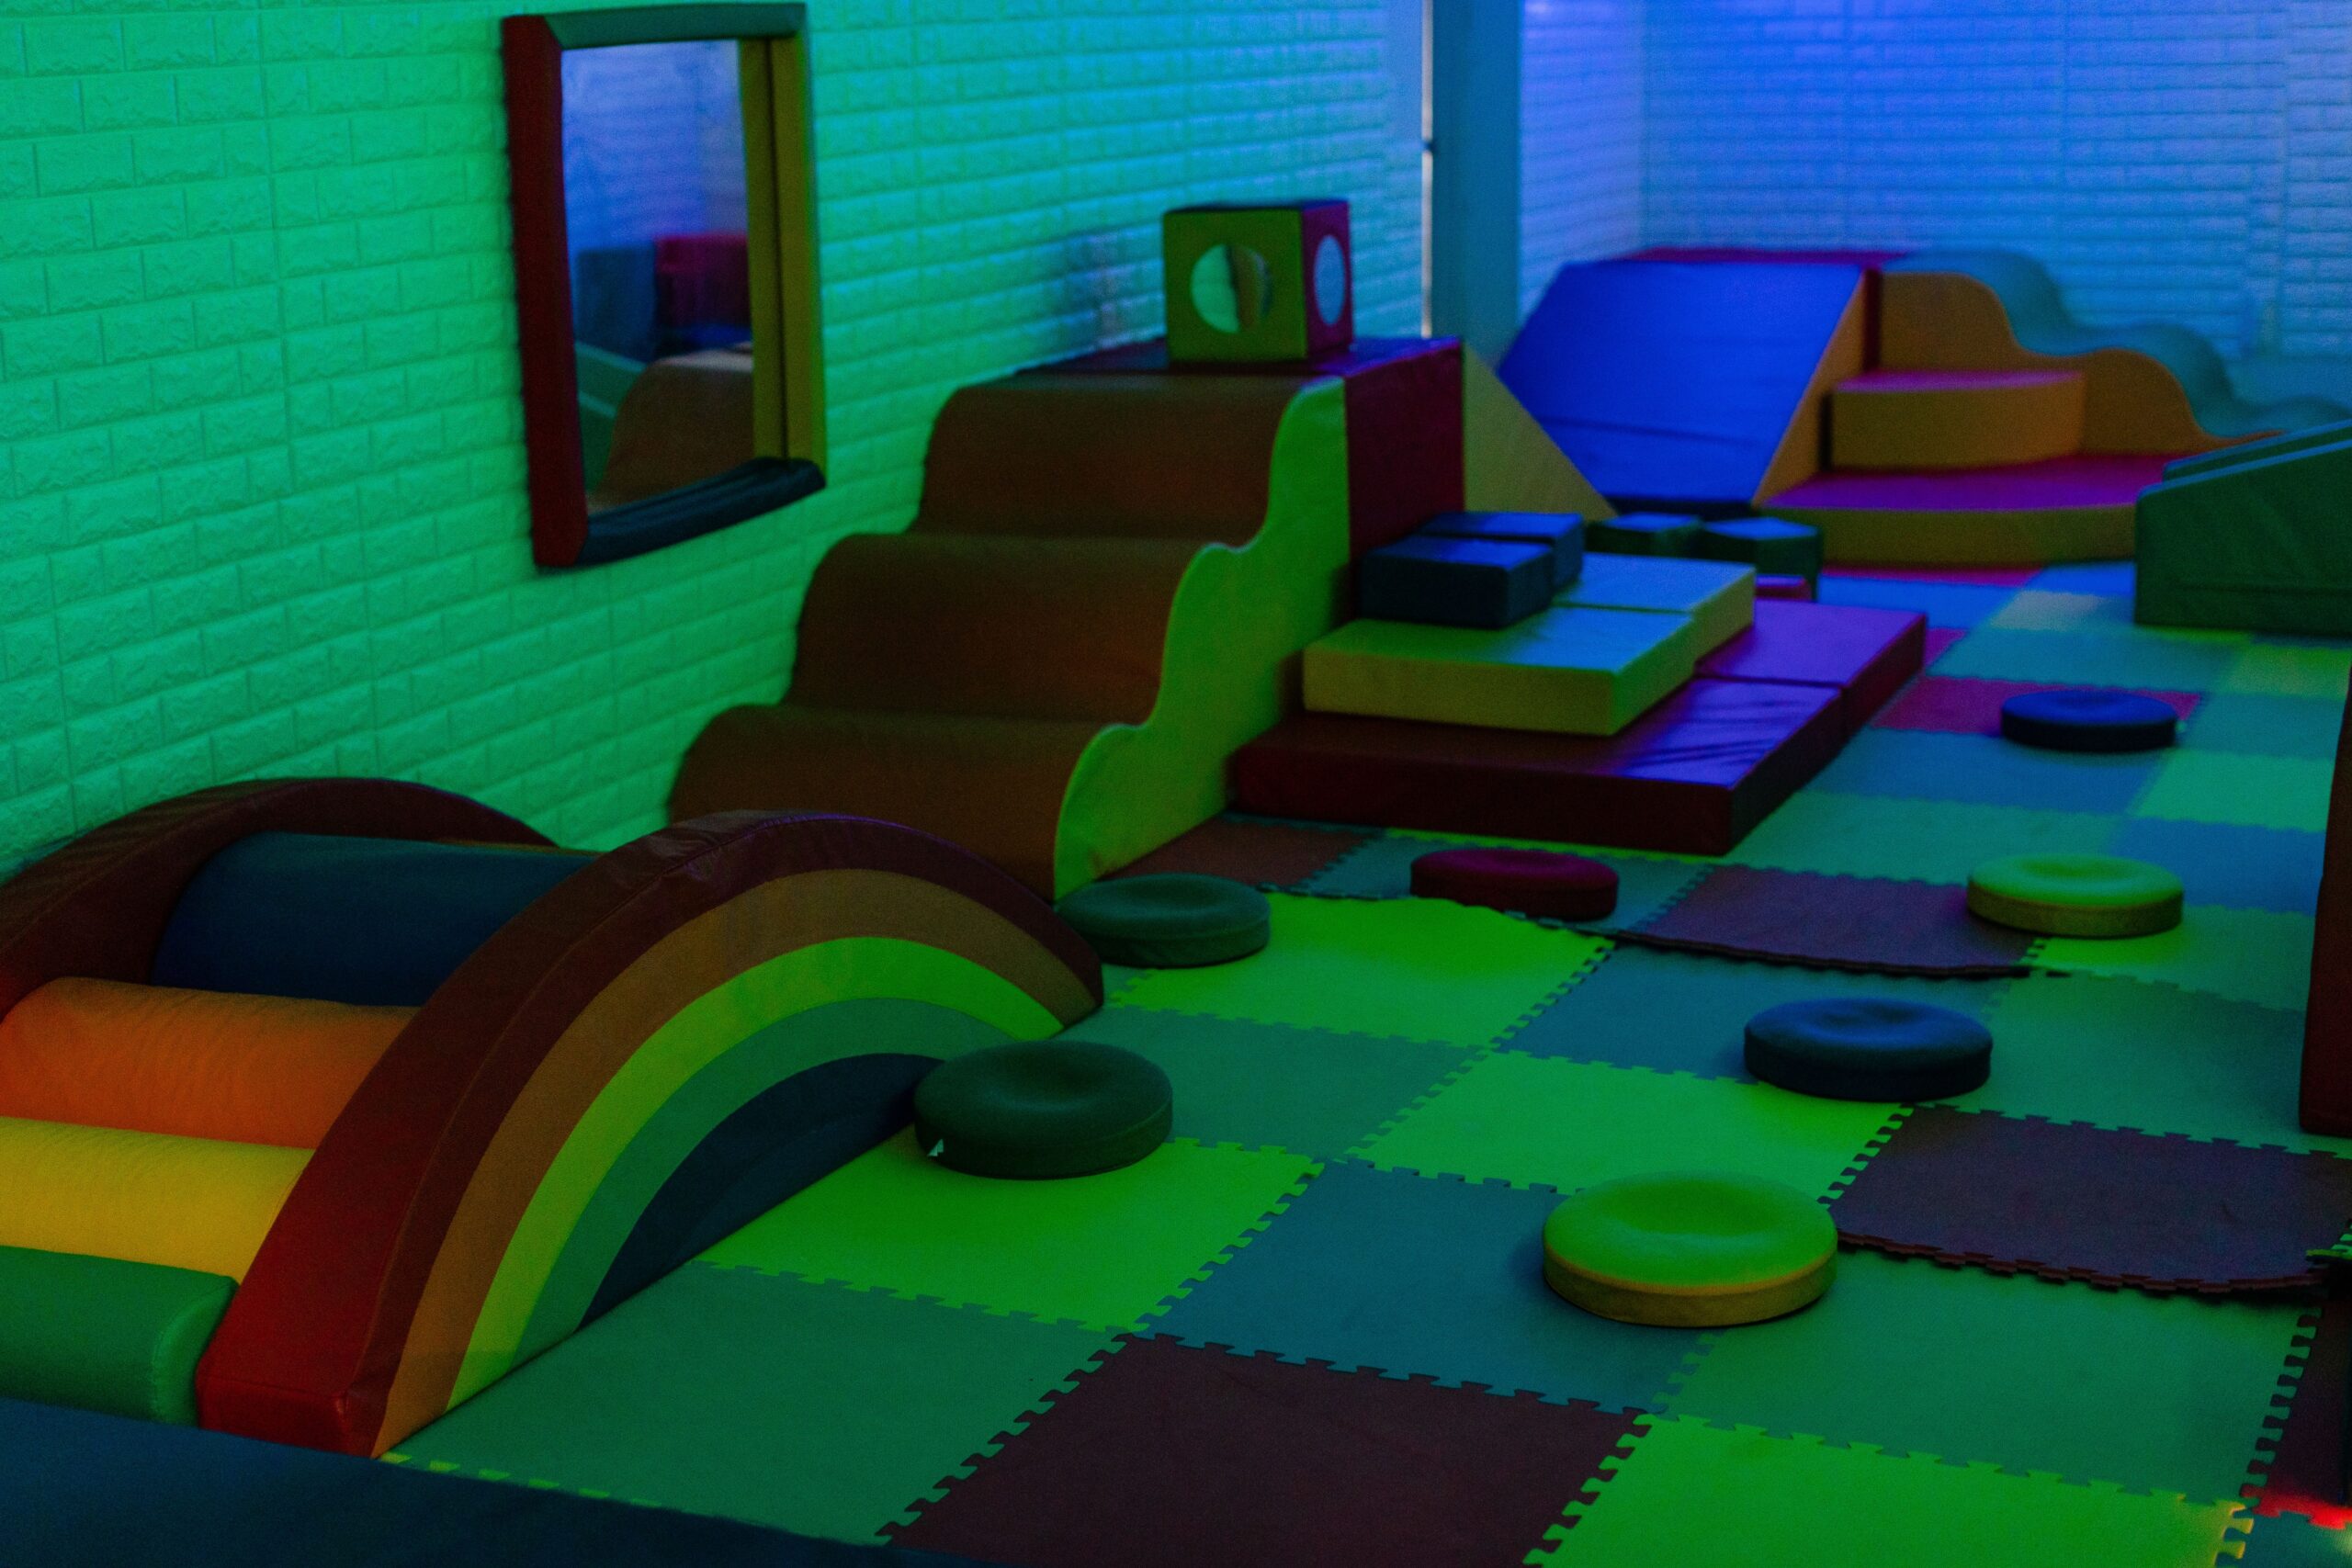 A soft play room at Q's Corner is designed to have 360-degree padding for children.